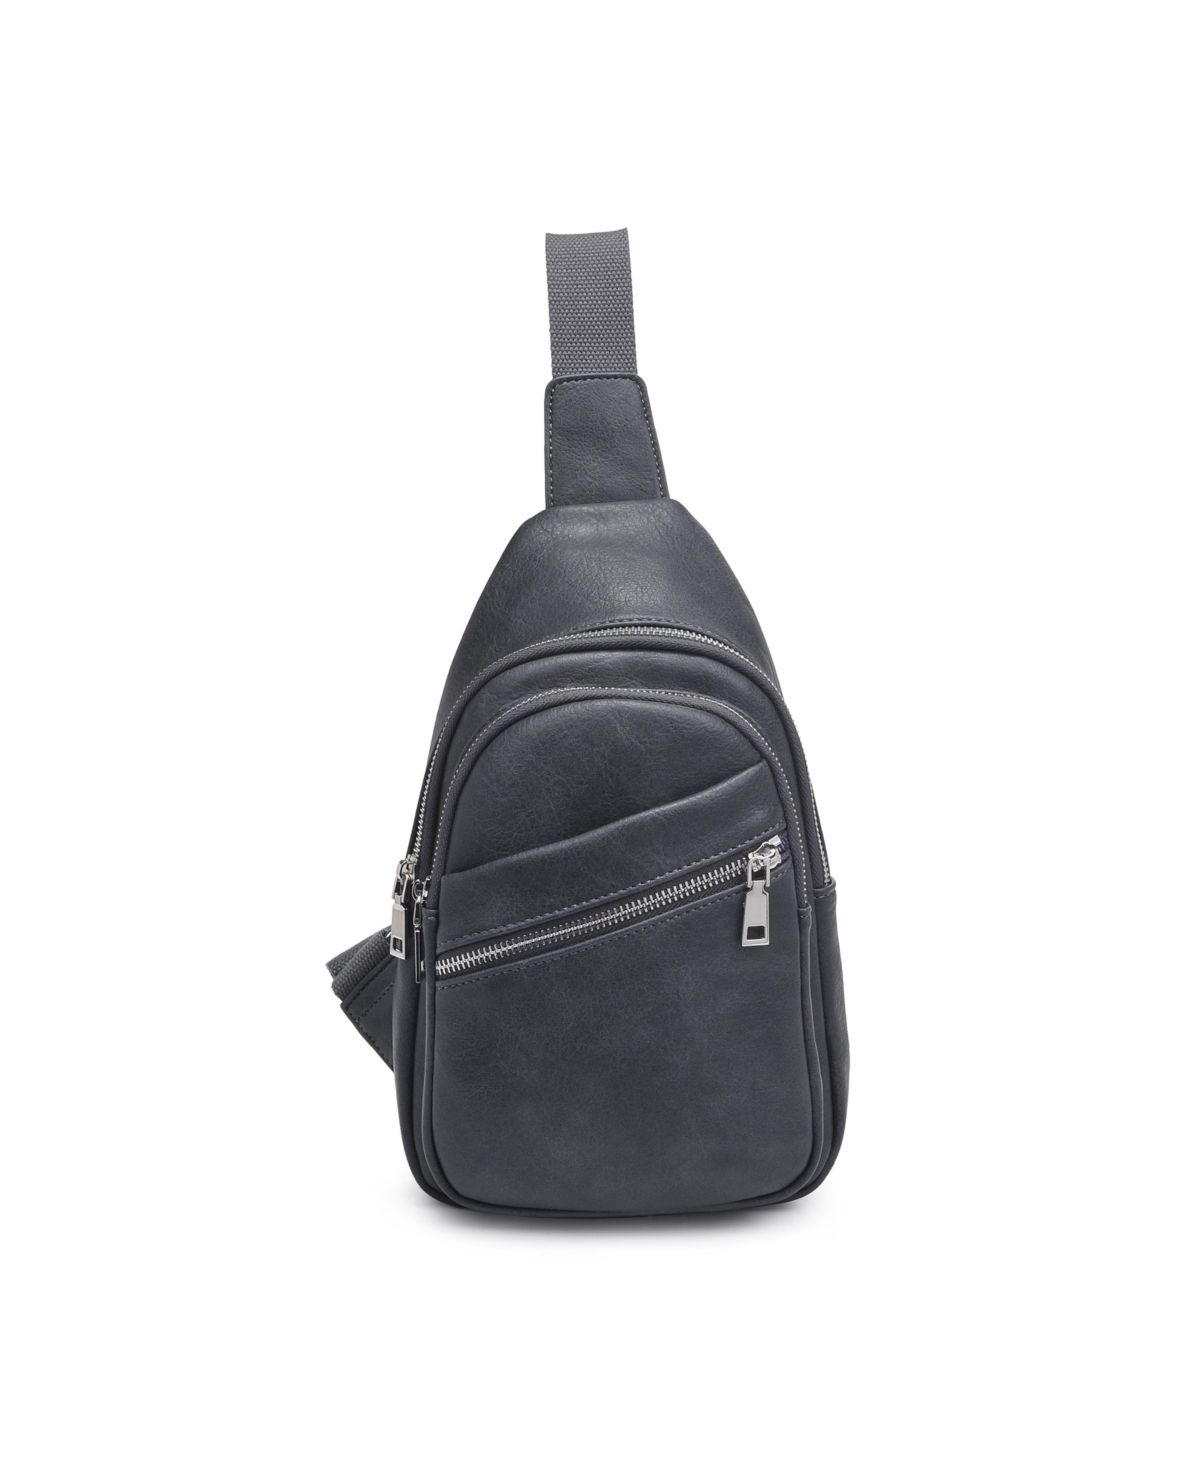 Urban Expressions Zephyr Sling Backpack In Charcoal